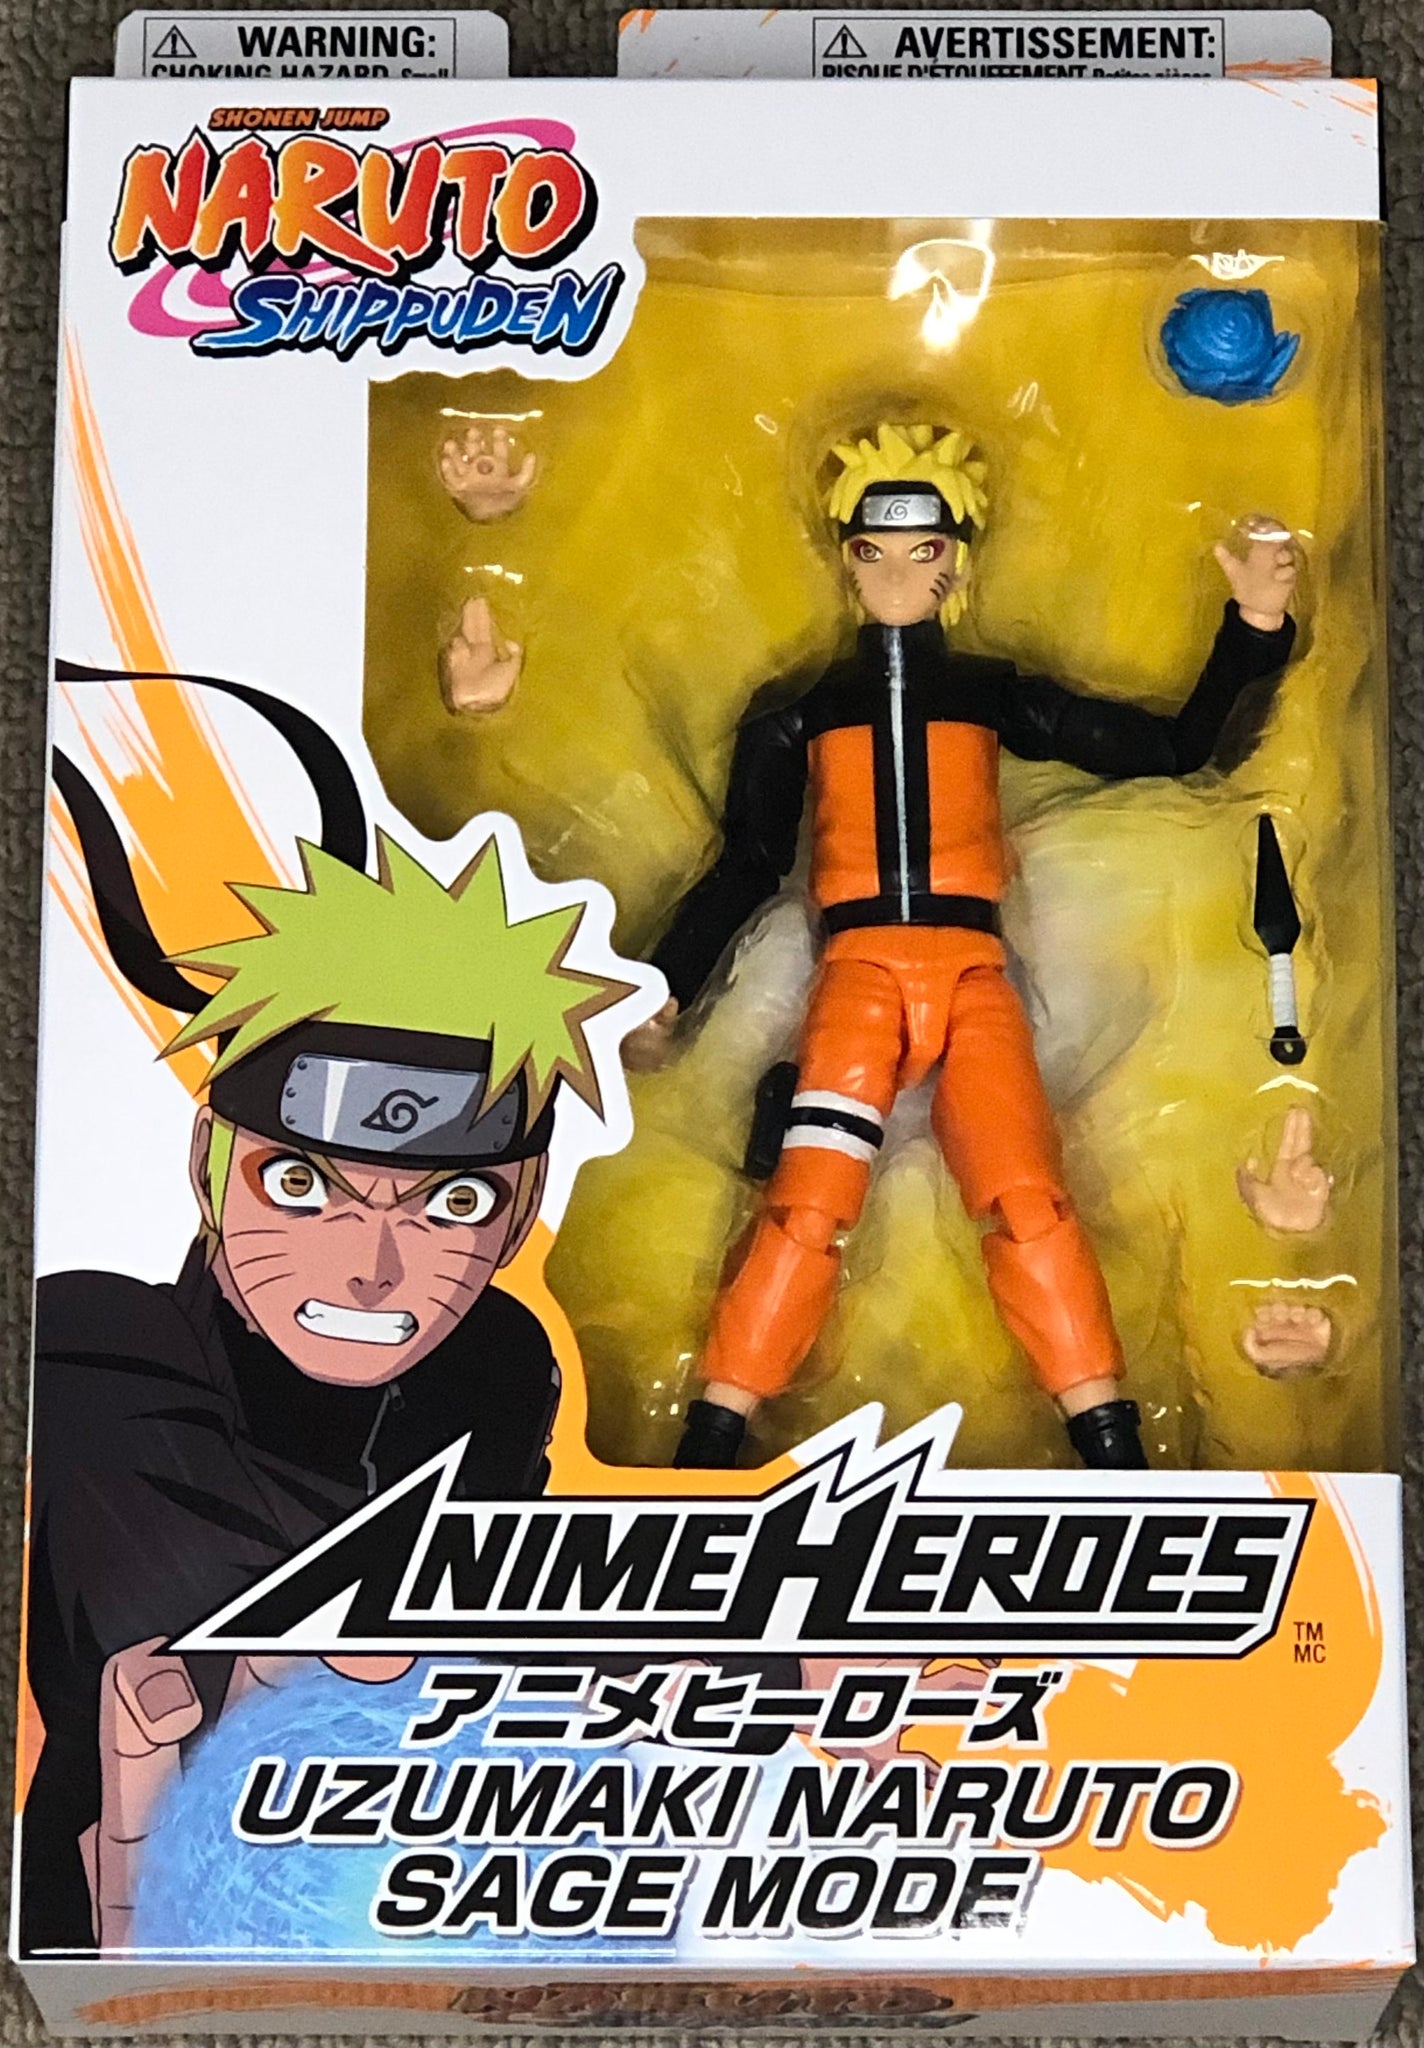 Bandai Anime Heroes hands-on - Sturdy and posable | The Nerdy